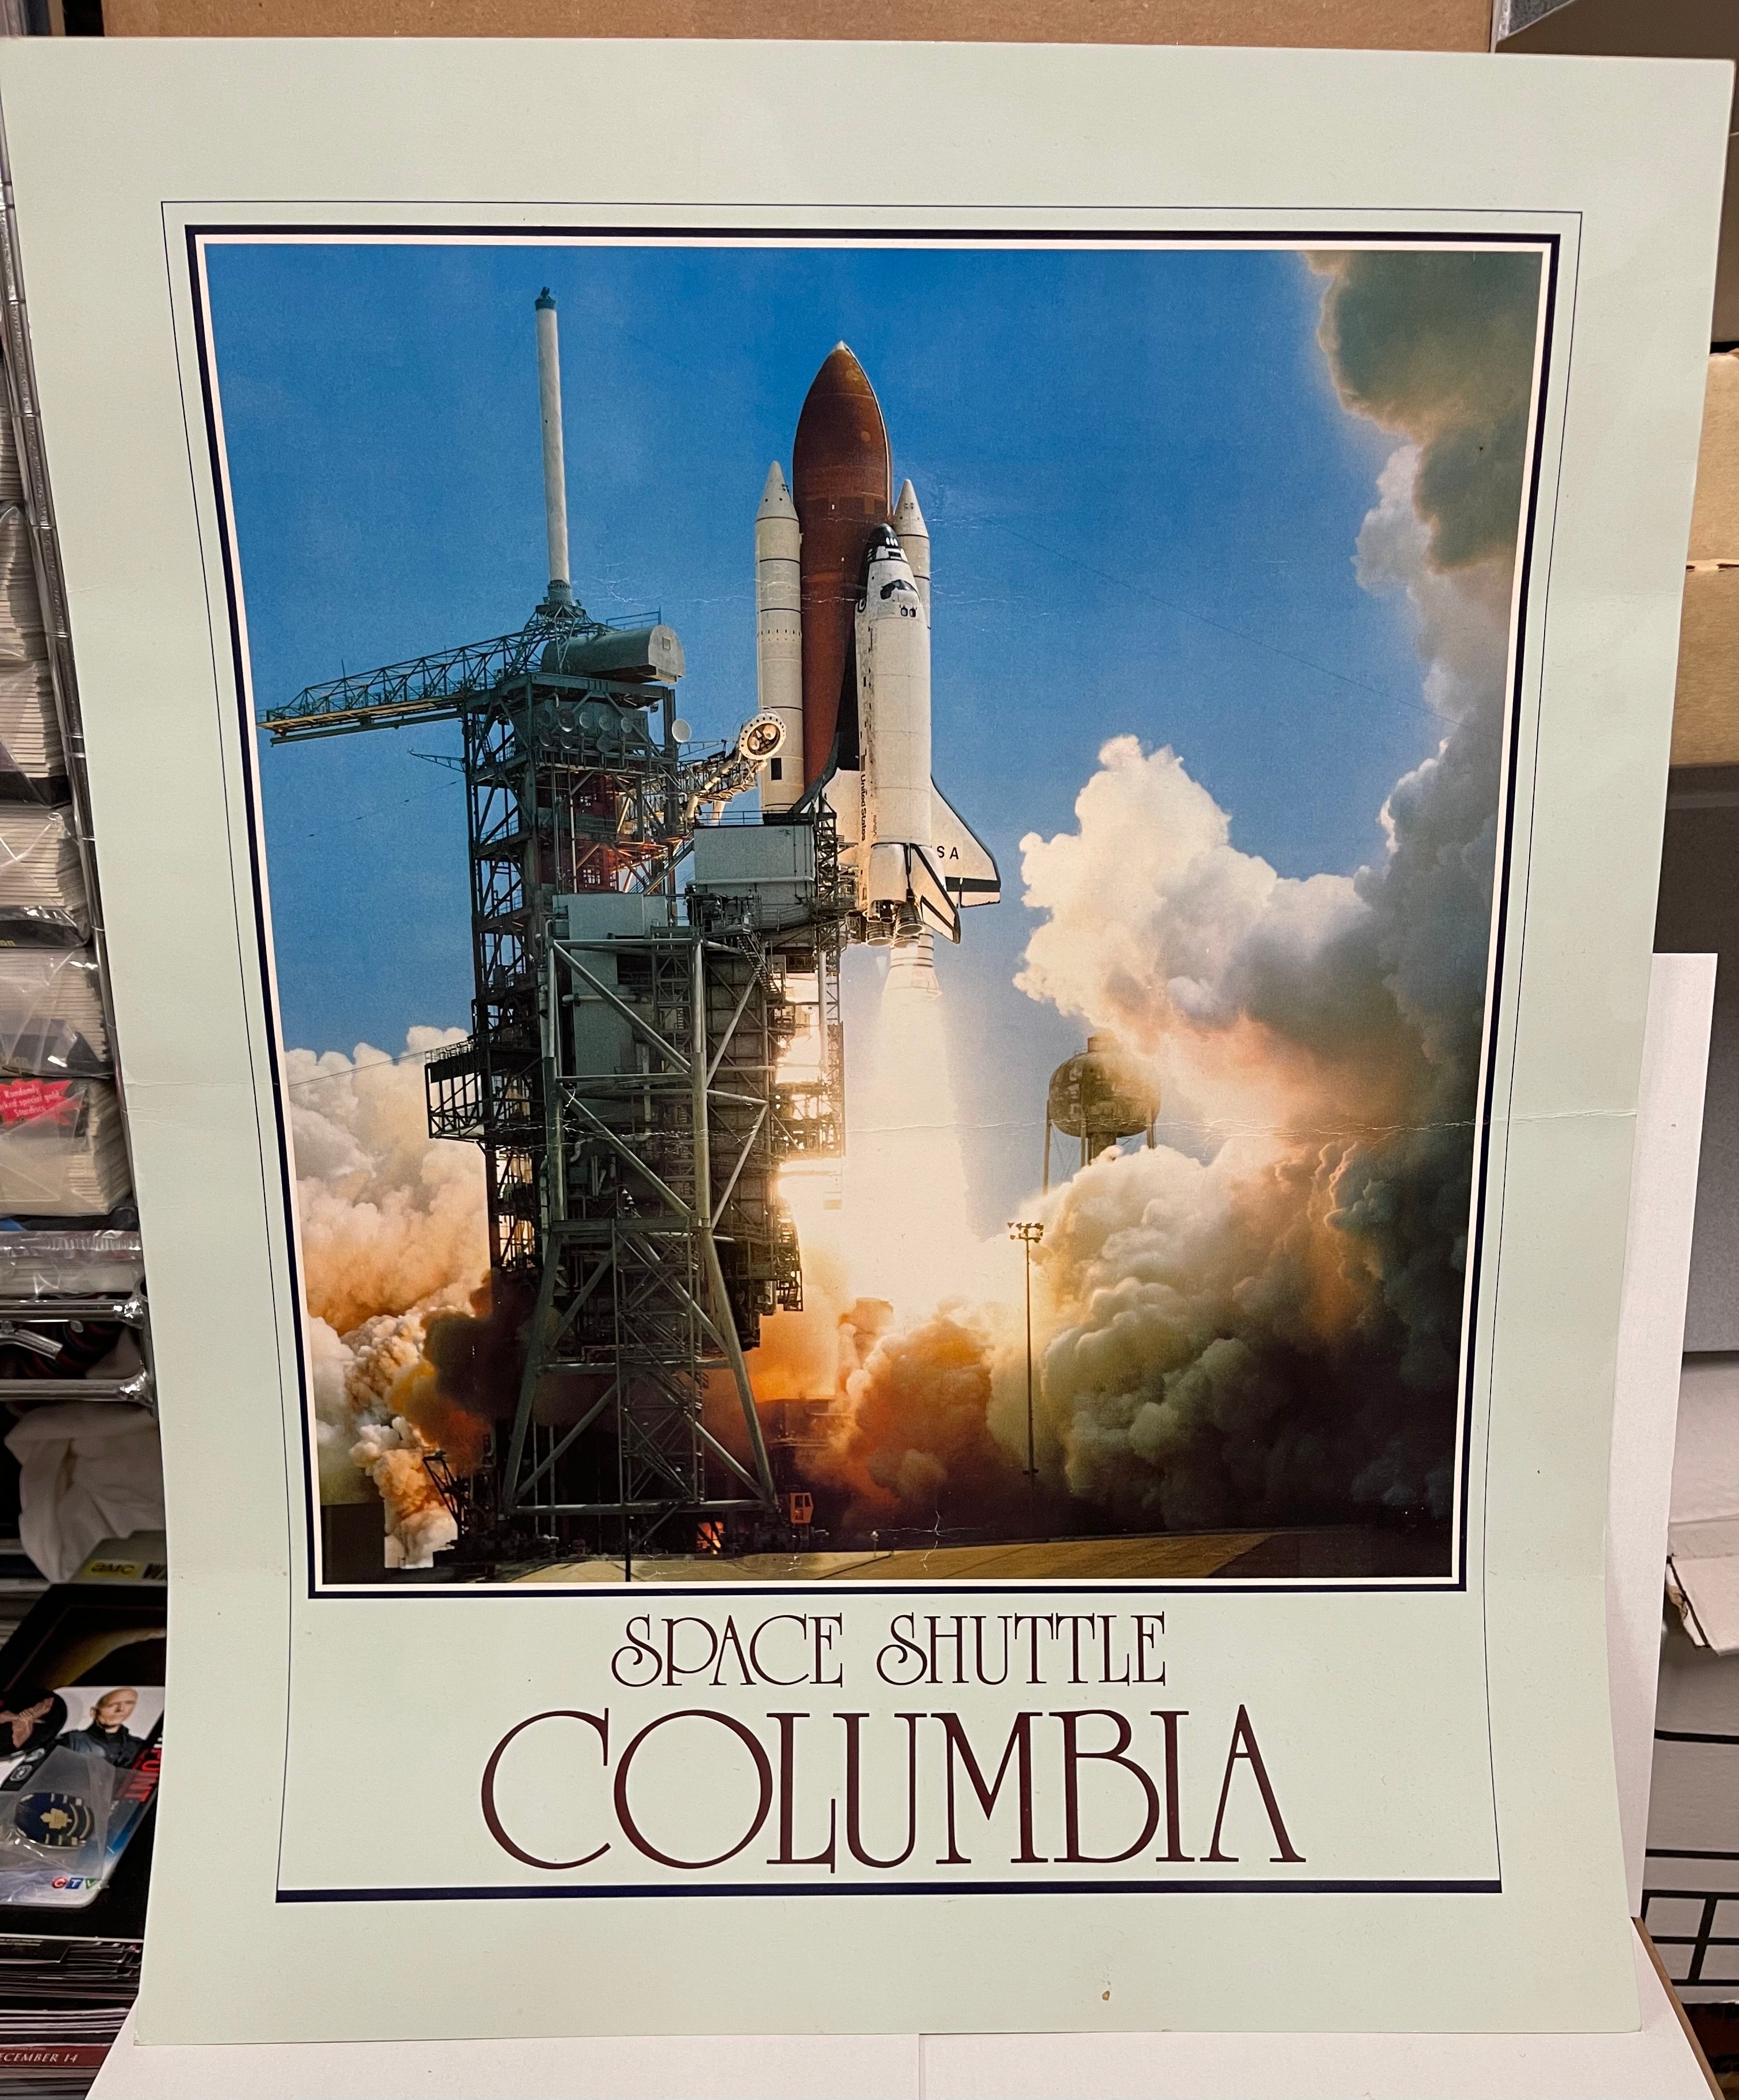 Space Shuttle Columbia rare cardboard poster 16x20 from 1986